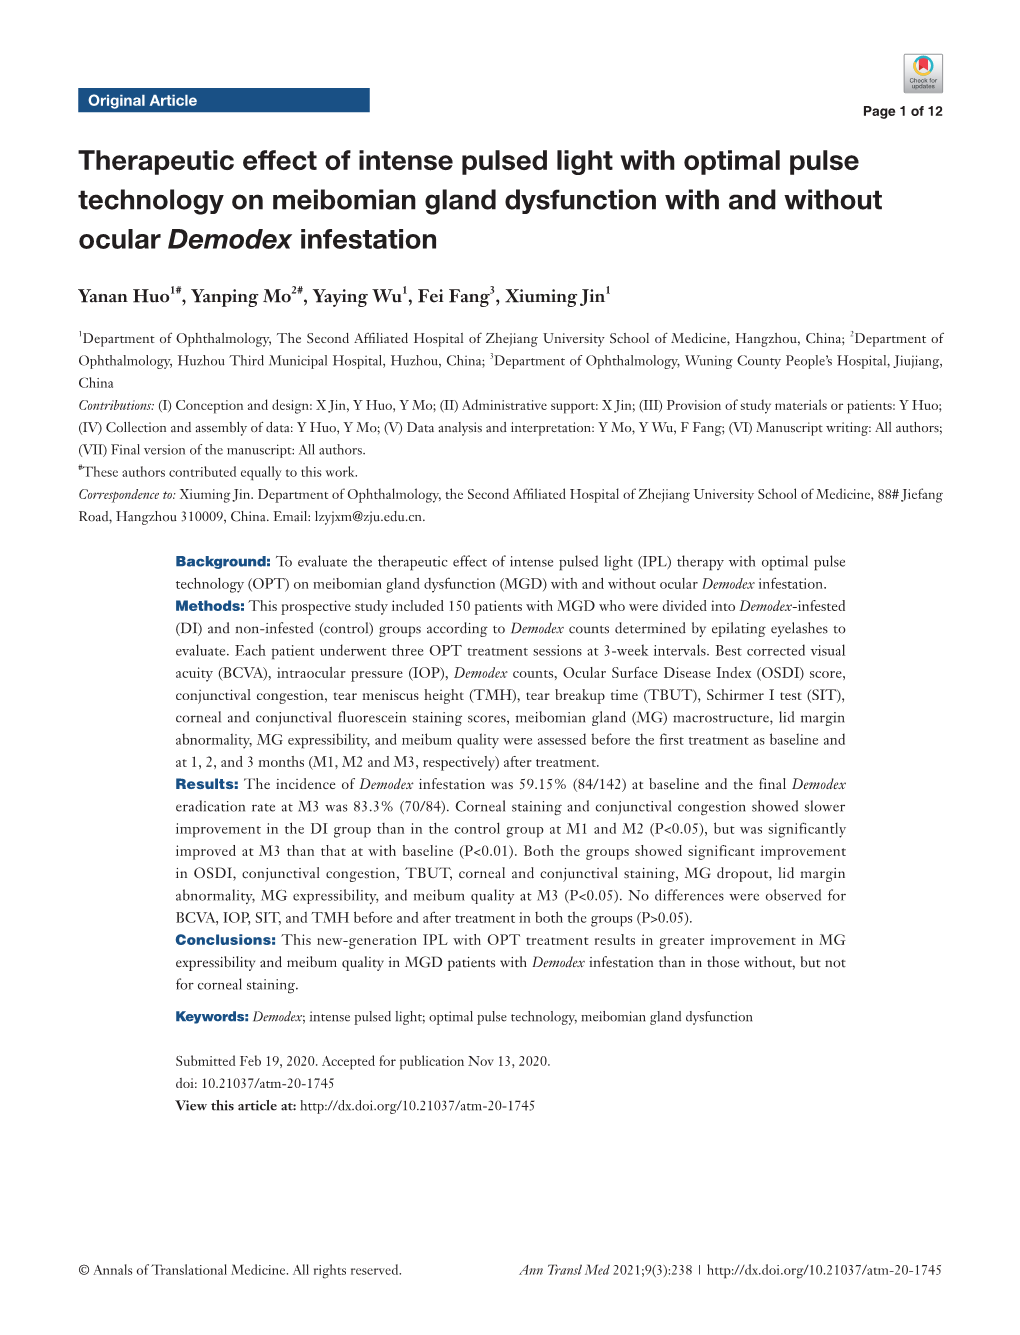 Therapeutic Effect of Intense Pulsed Light with Optimal Pulse Technology on Meibomian Gland Dysfunction with and Without Ocular Demodex Infestation